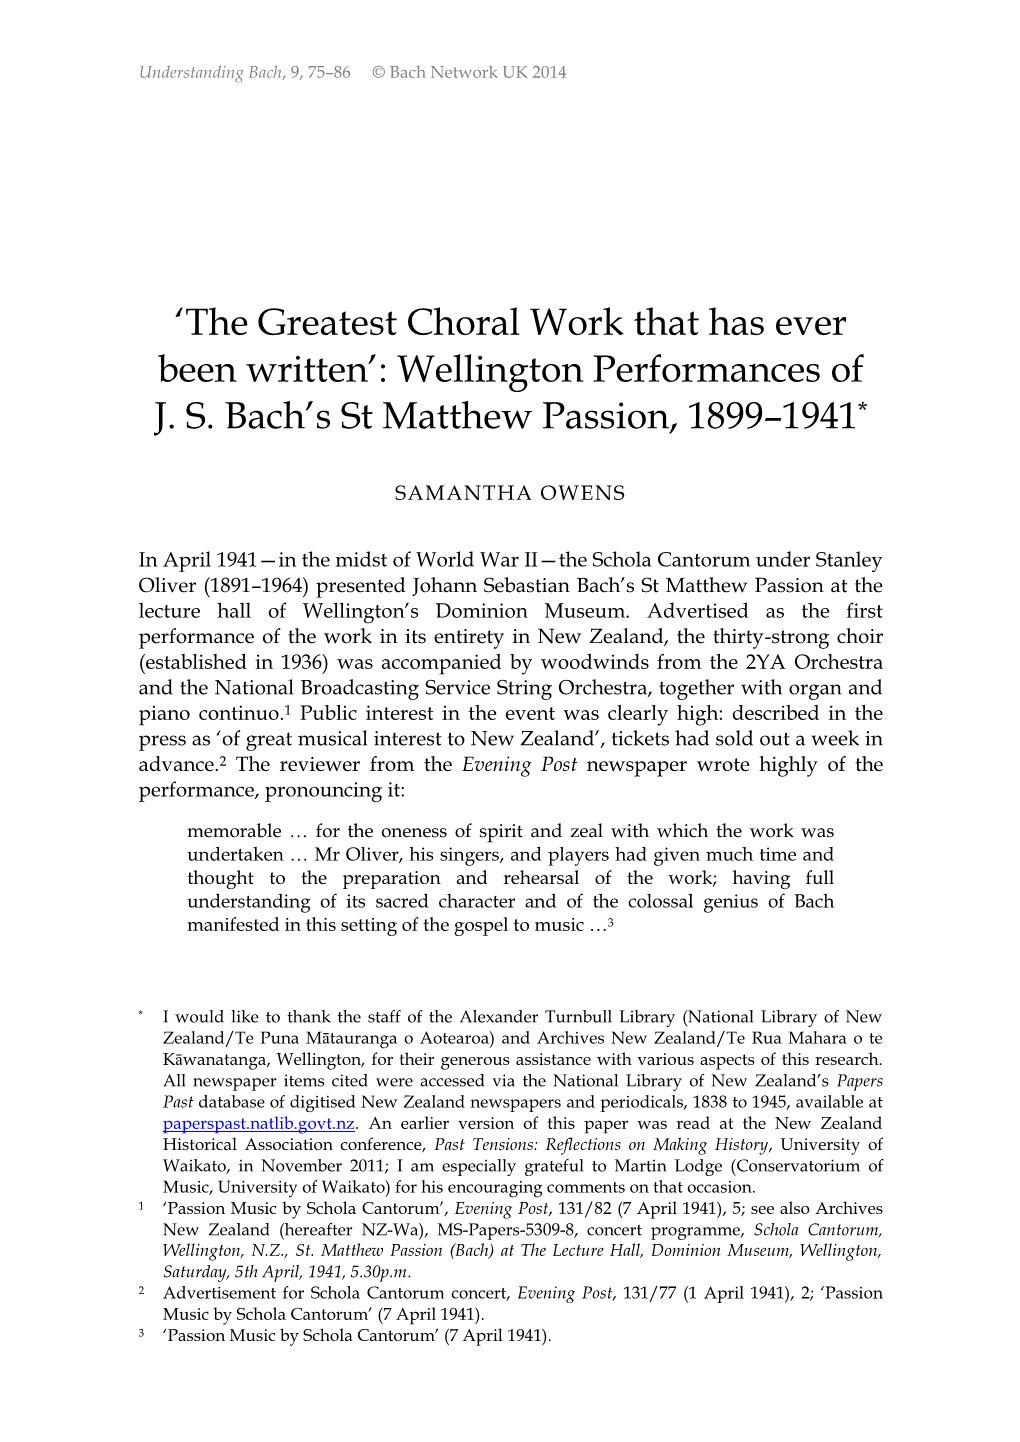 'The Greatest Choral Work That Has Ever Been Written'